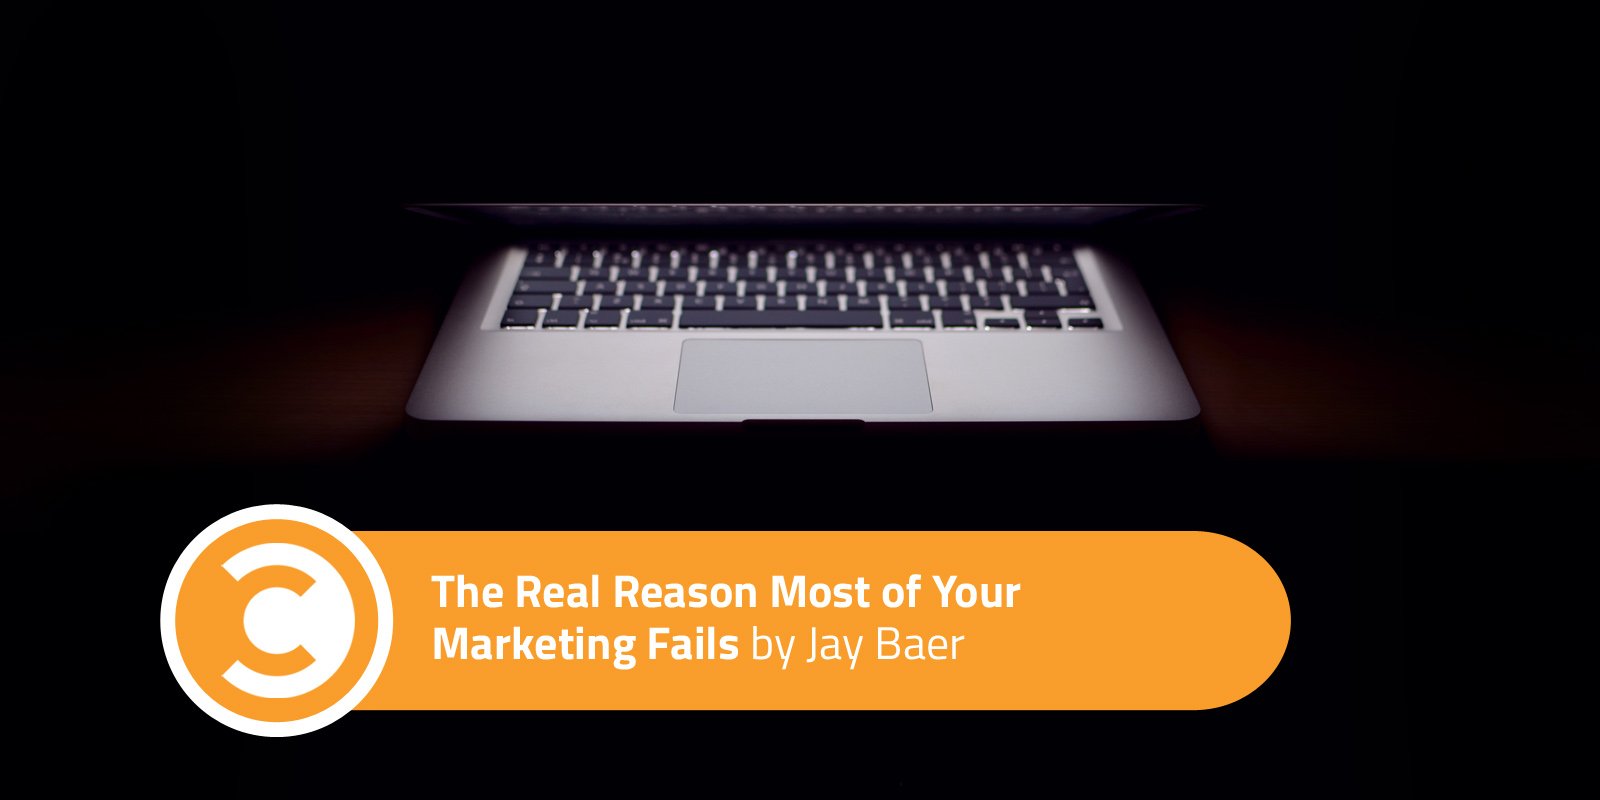 The Real Reason Most of Your Marketing Fails